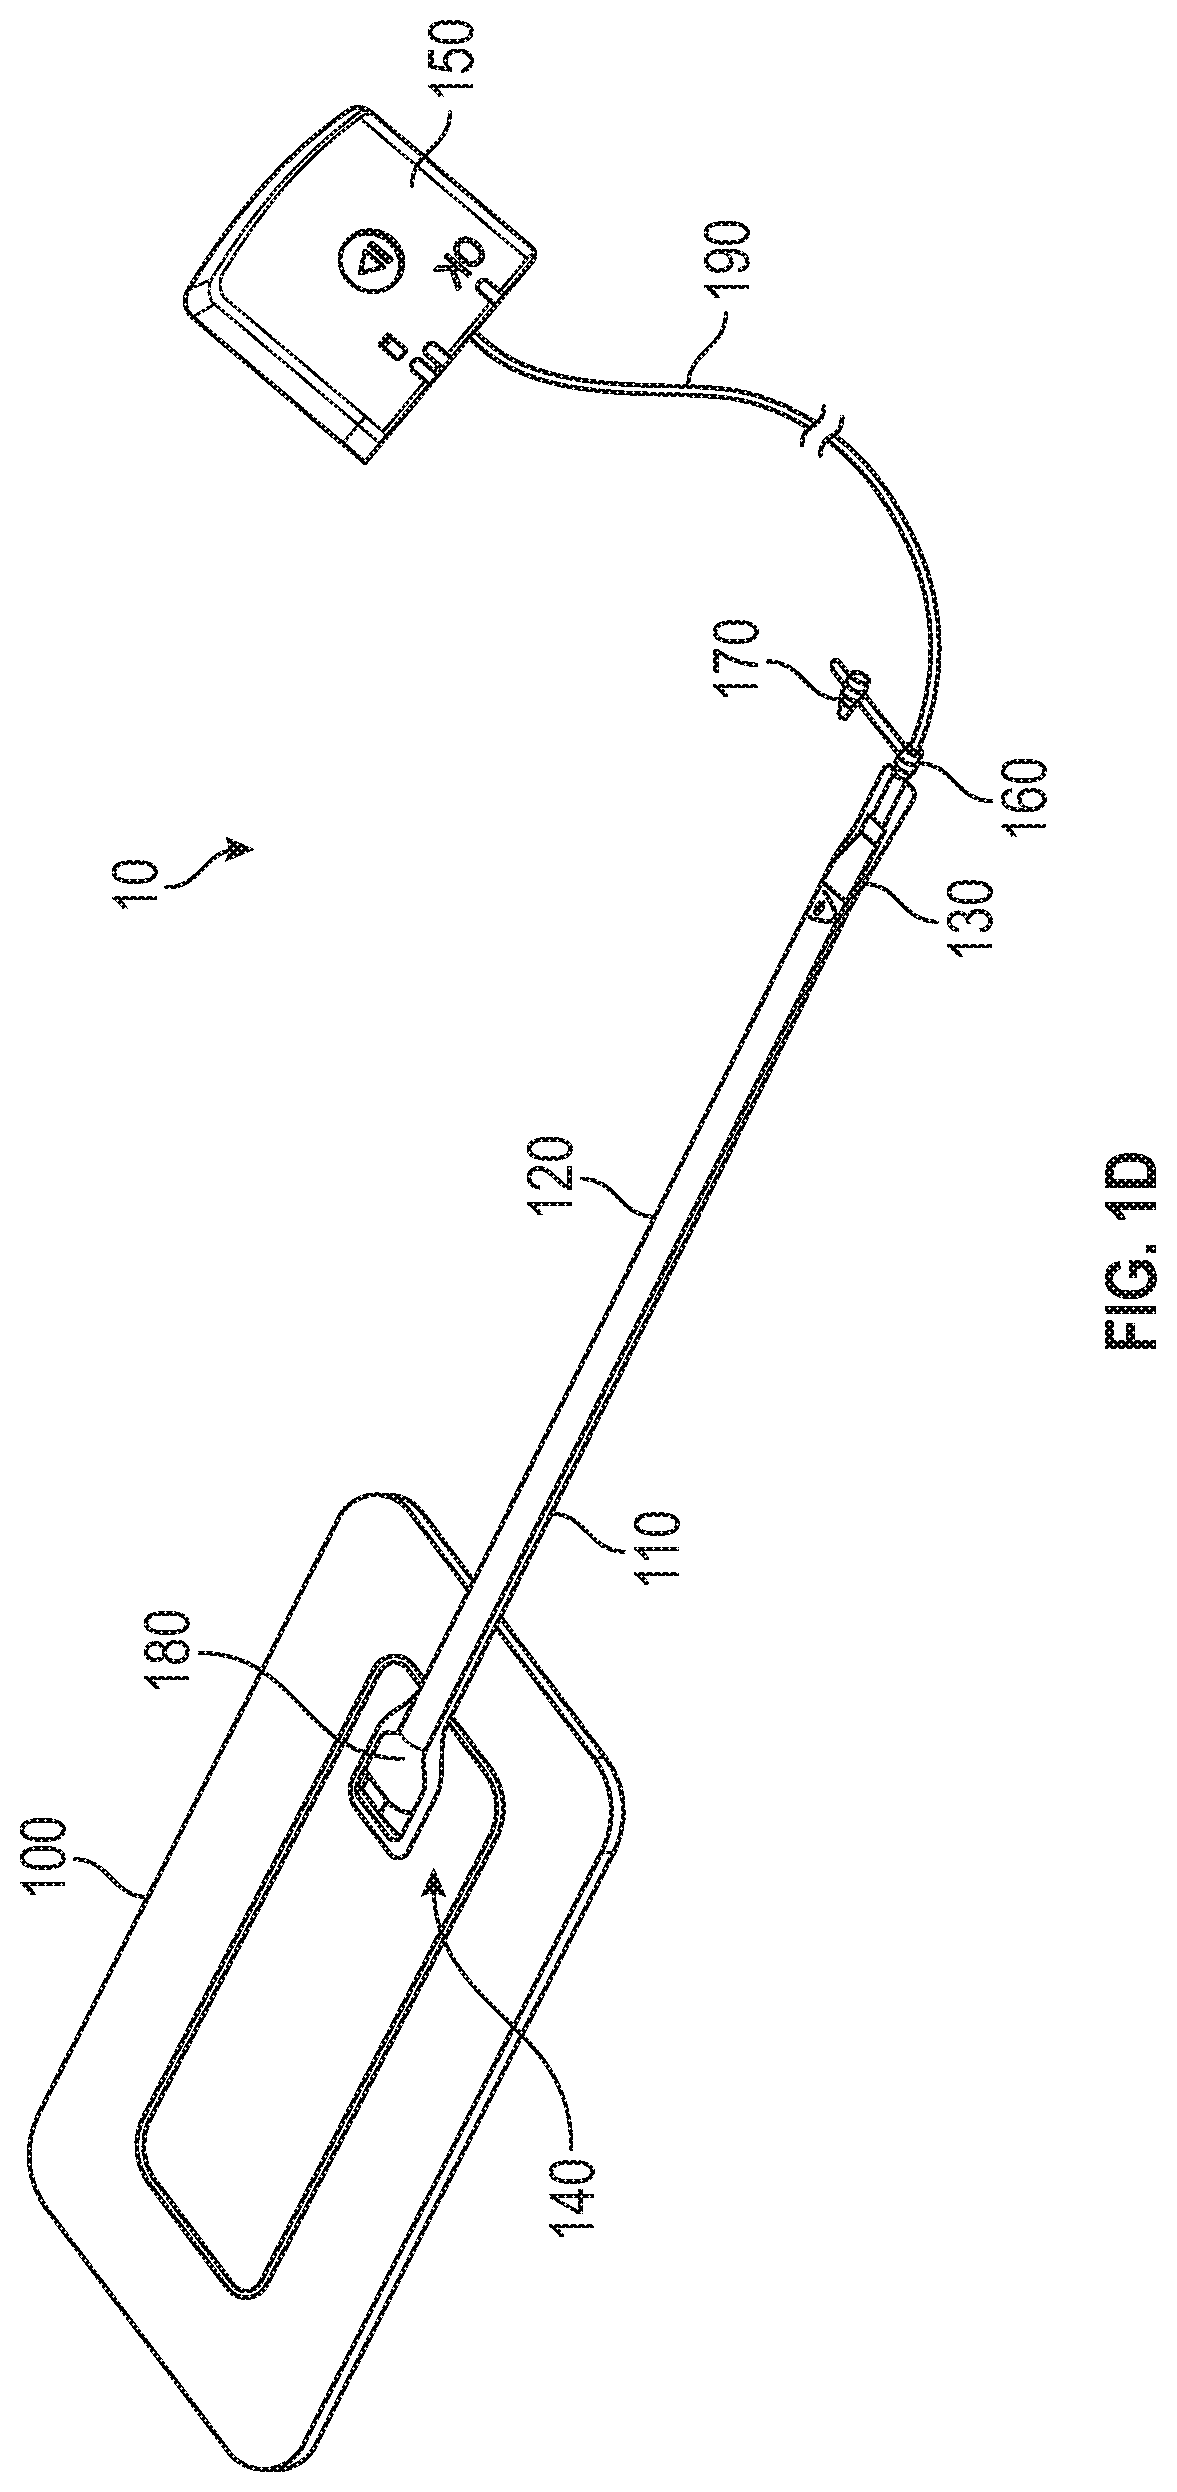 Sensor positioning and optical sensing for sensor enabled wound therapy dressings and systems